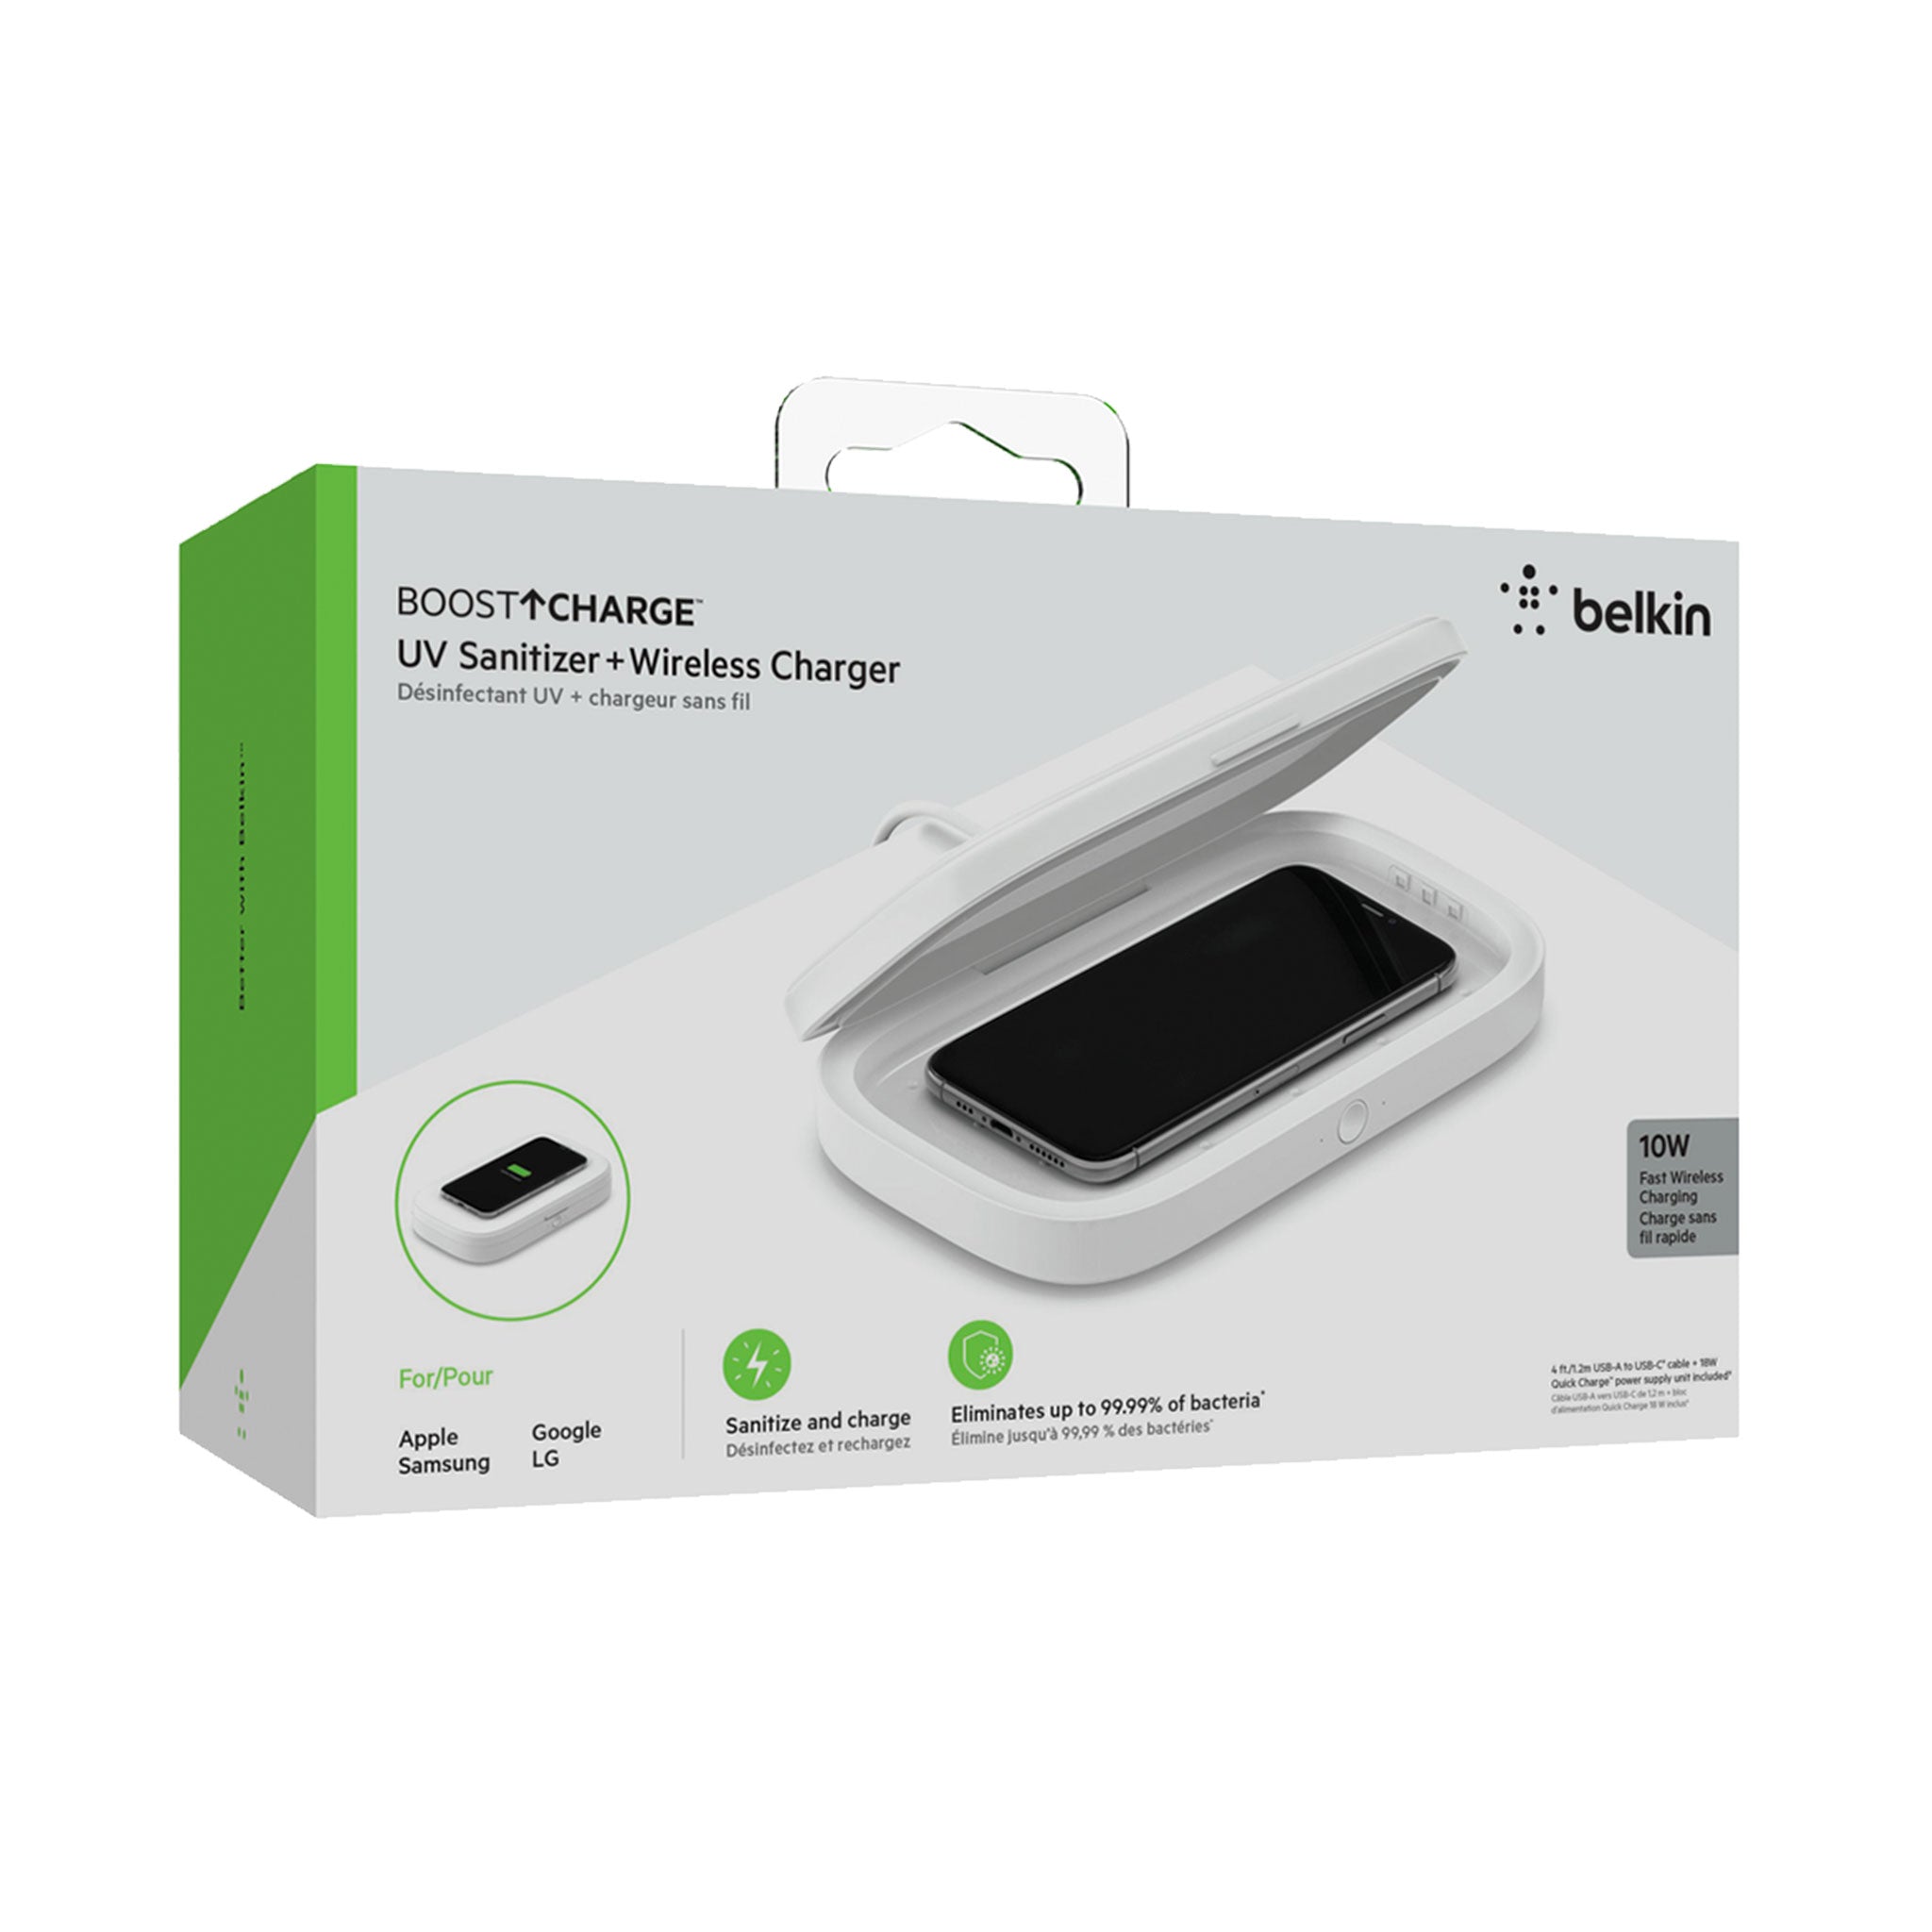 Belkin - Boost Charge Uv Sanitizer With Wireless Charging 10w - White